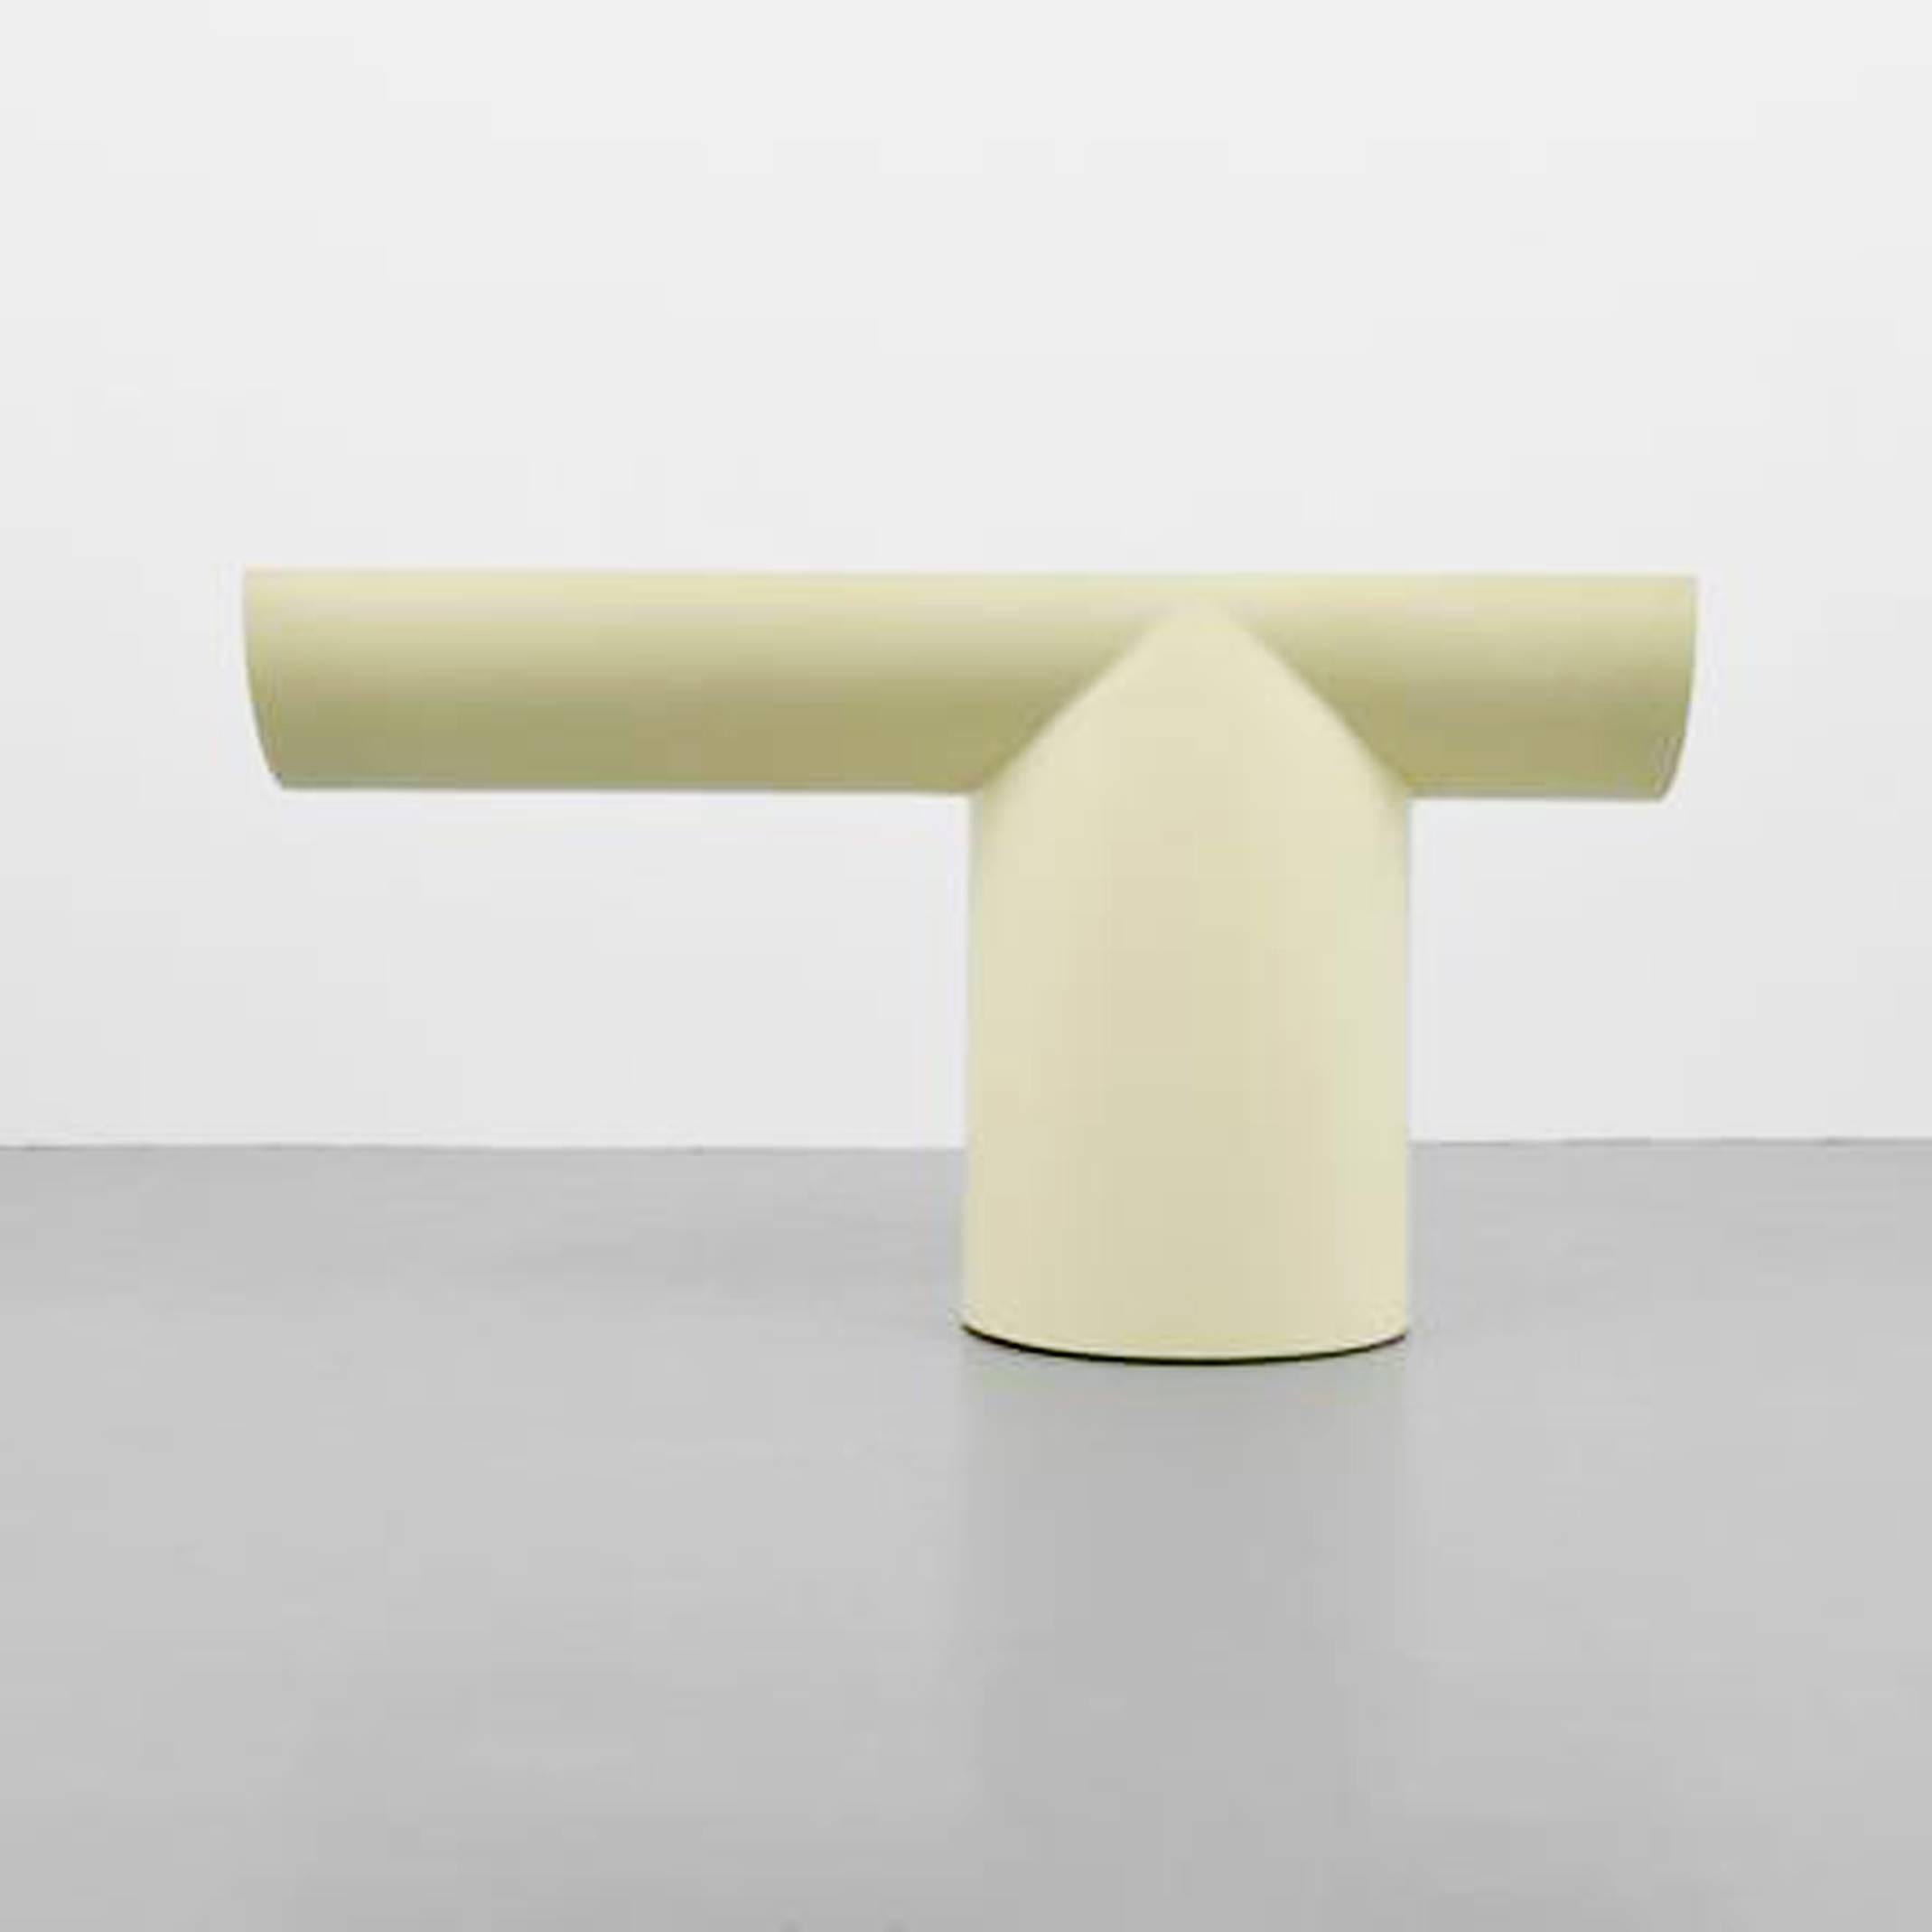 Mid-Century J Wade Beam for Brueton Tee console table.
Lacquered Fiberglass,
1970.

Mid-Century Modern sculptural cream lacquered console, sofa or hall table featuring a cantilever design. The asymmetrical design features thick tubular and half